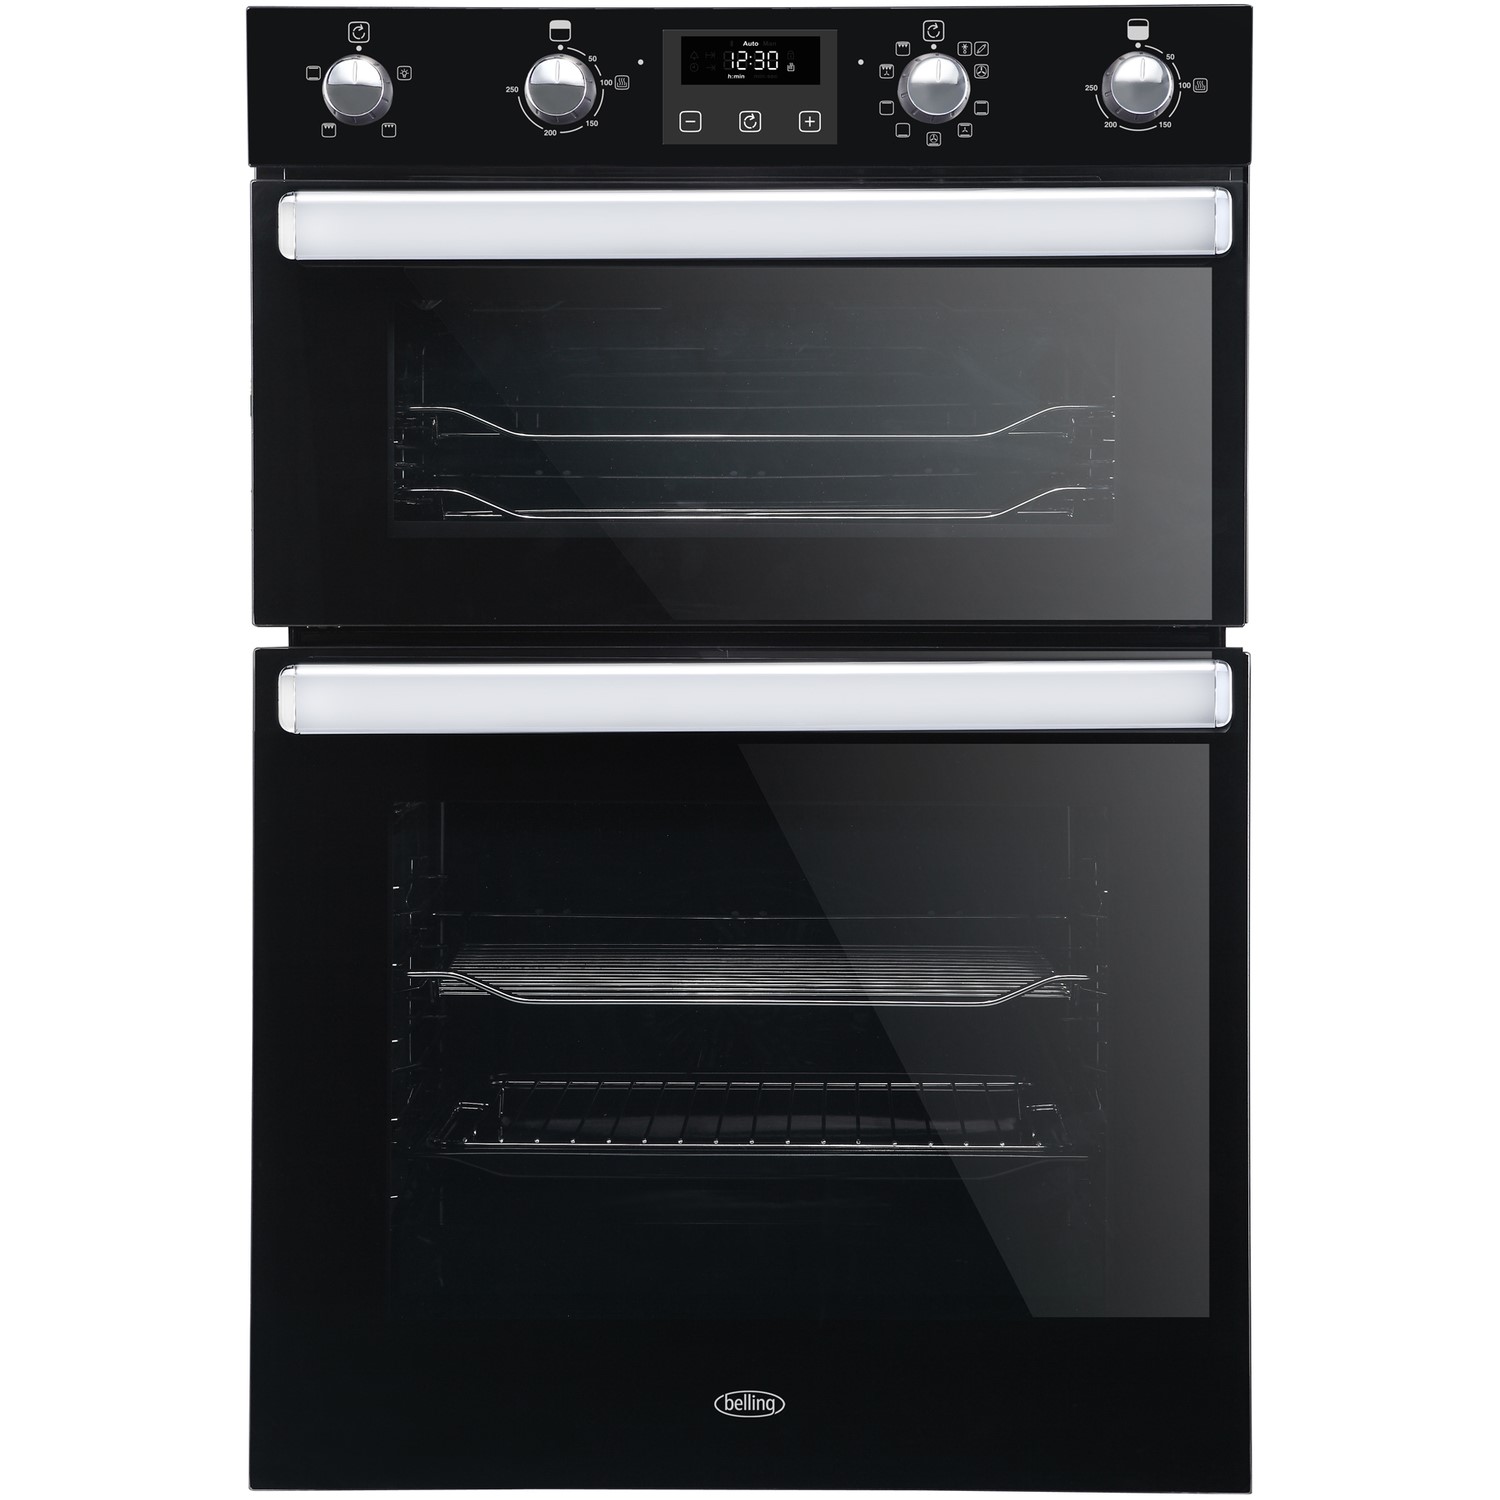 Belling BI902MFCT Built In Double Oven with Catalytic Liners - Black